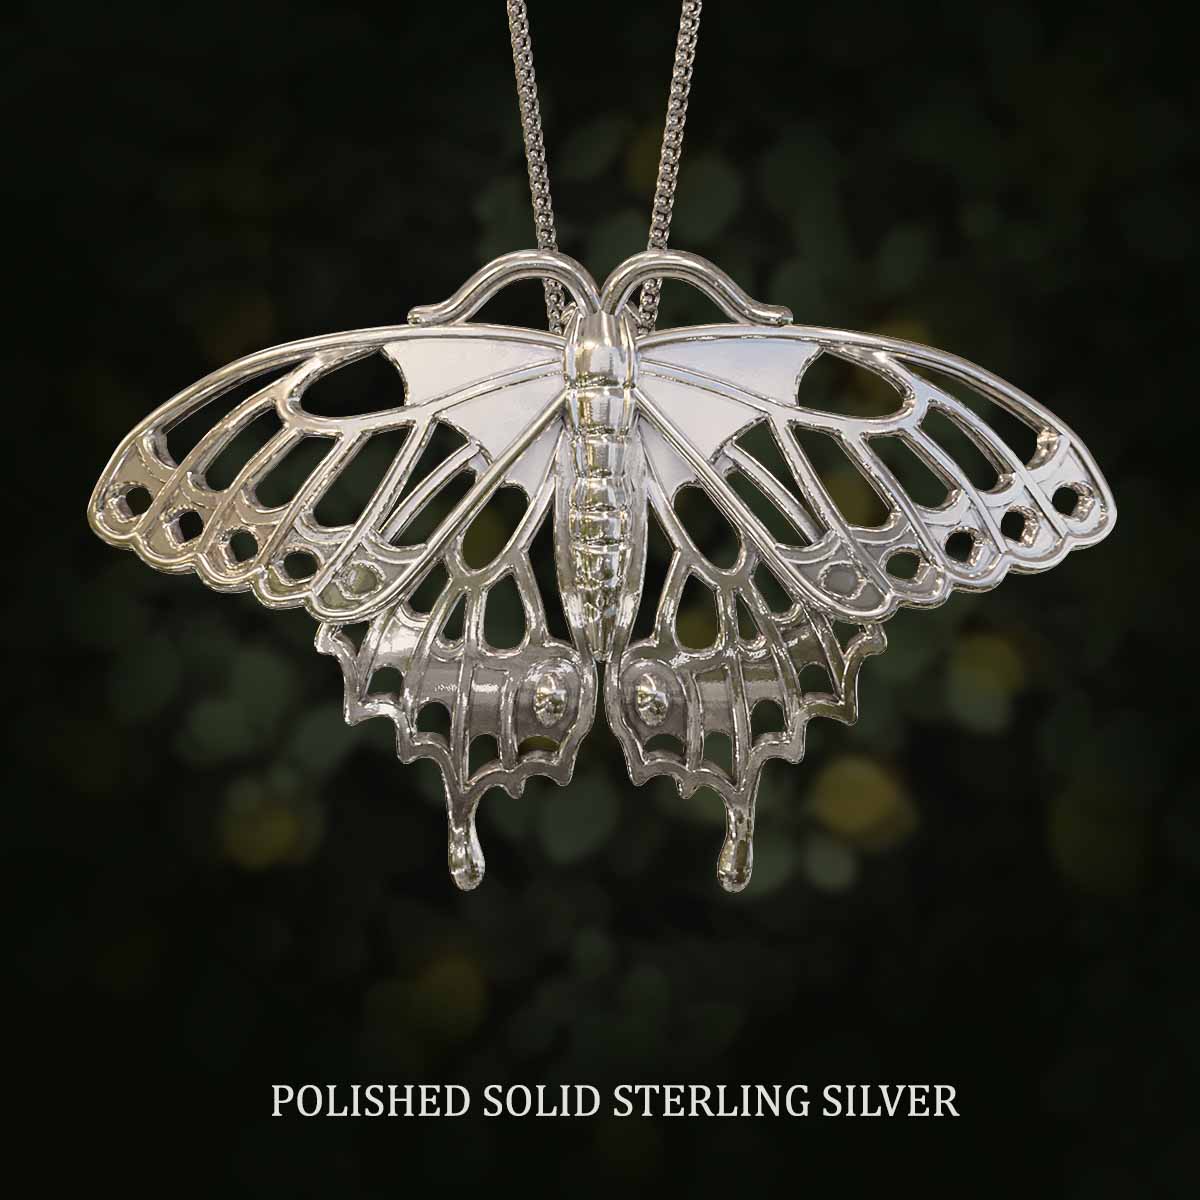     Polished-Solid-Sterling-Silver-Swallowtail-Butterfly-Pendant-Jewelry-For-Necklace